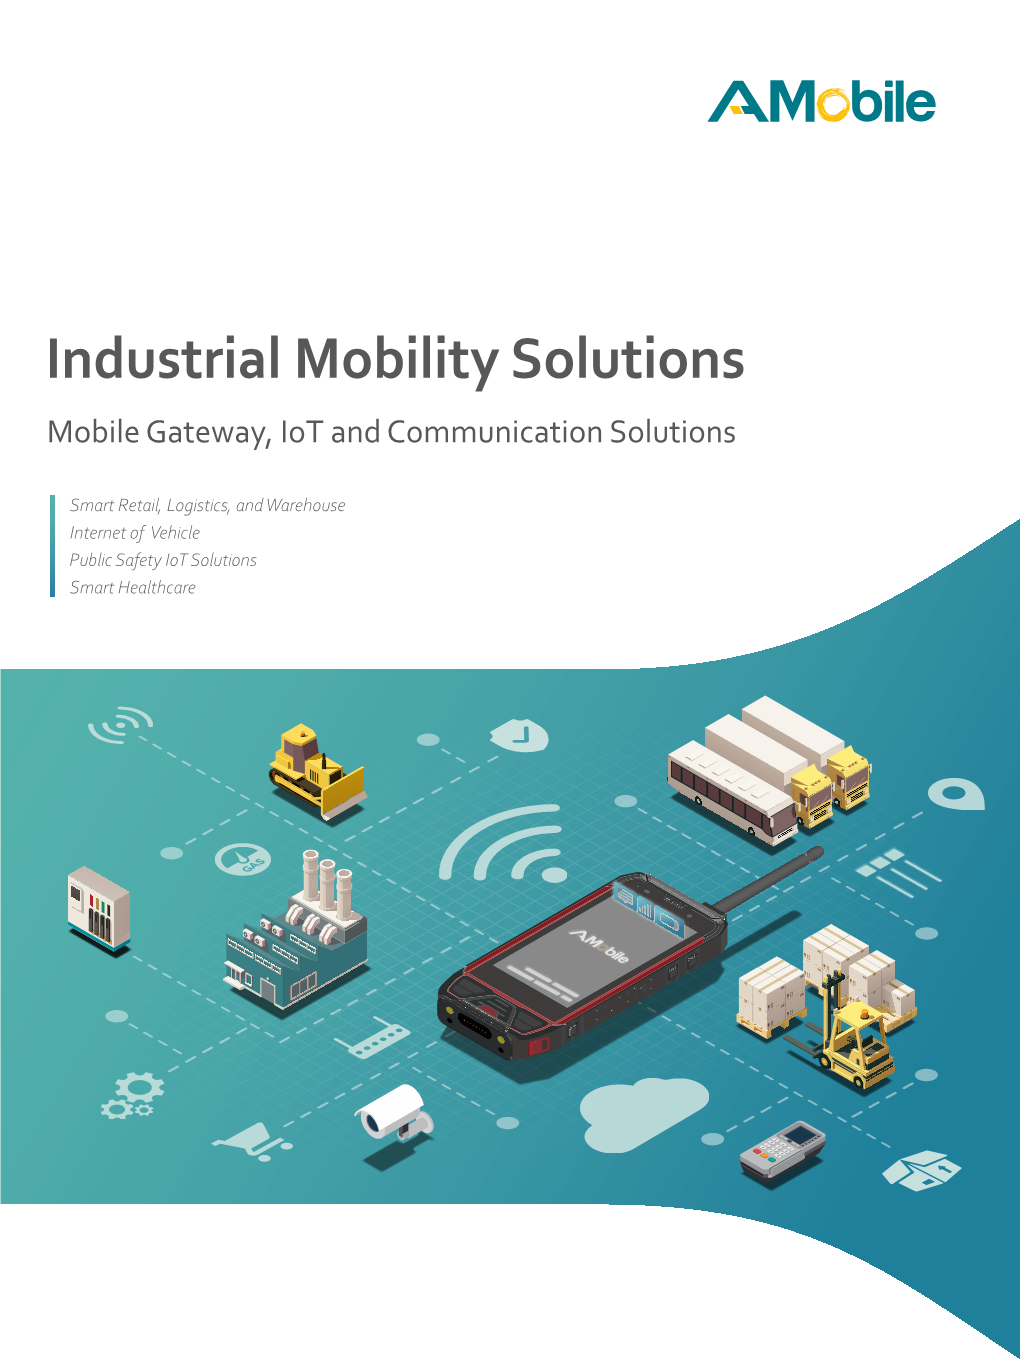 Industrial Mobility Solutions Mobile Gateway, Iot and Communication Solutions